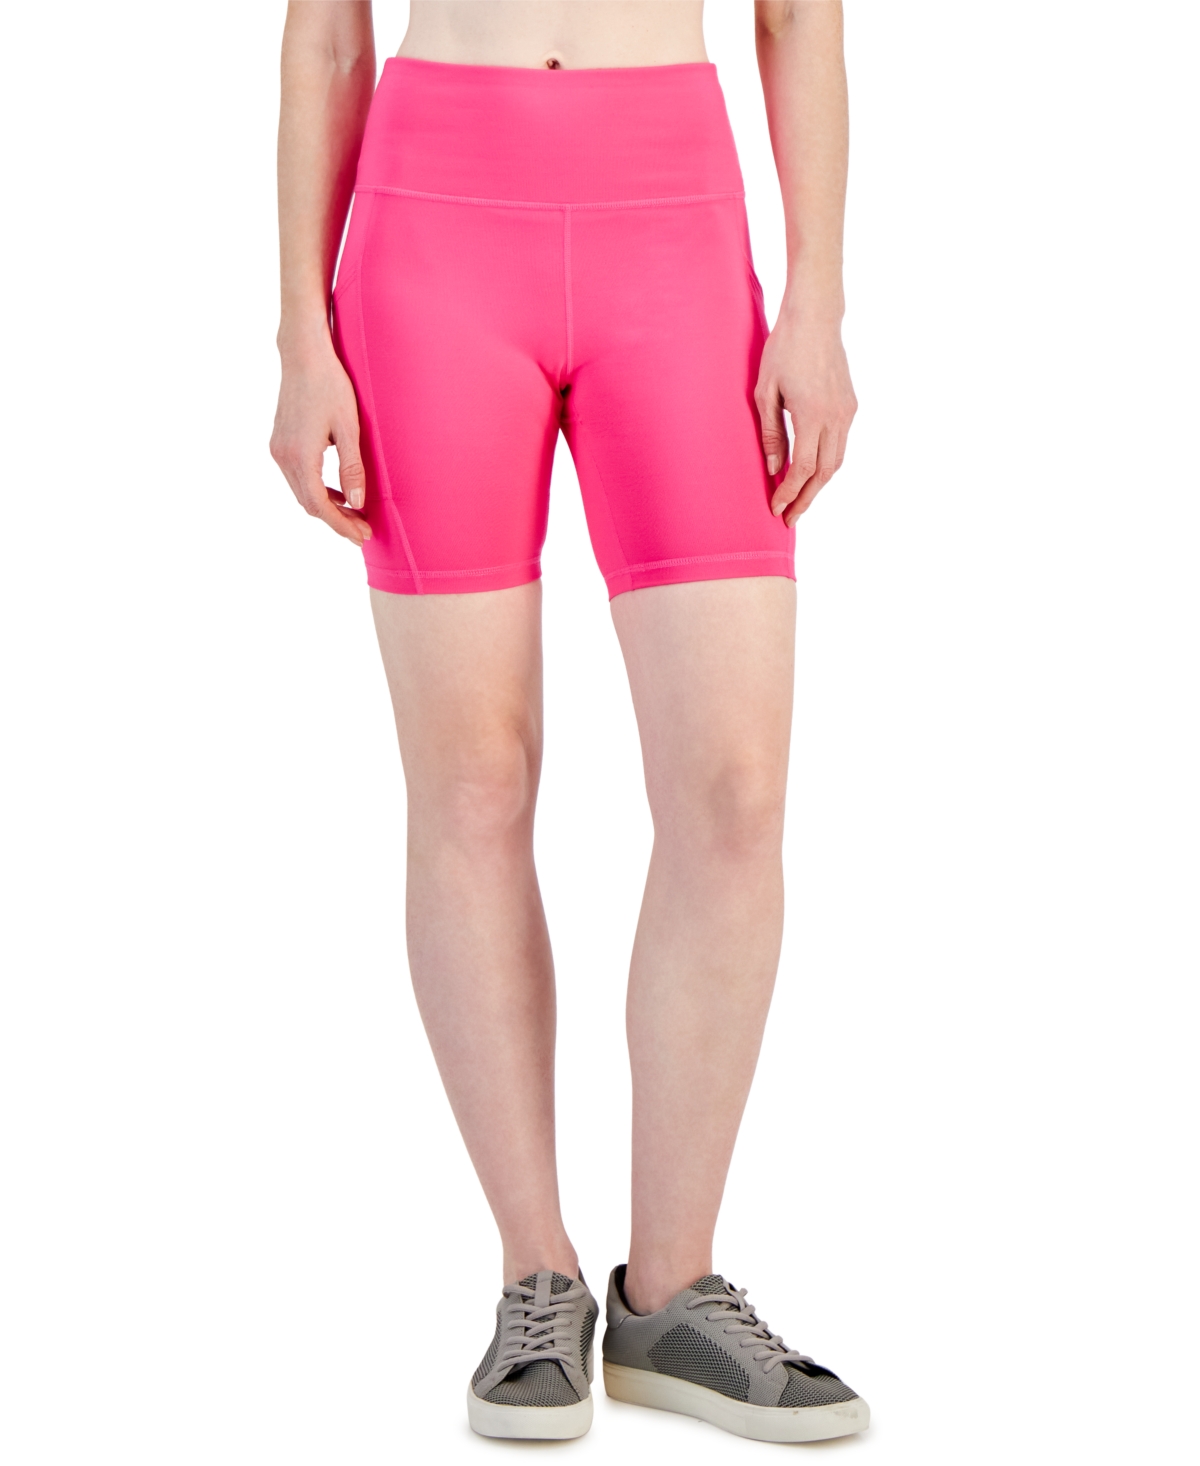 Women's Compression 7" Bike Shorts, Created for Macy's - Molten Pink